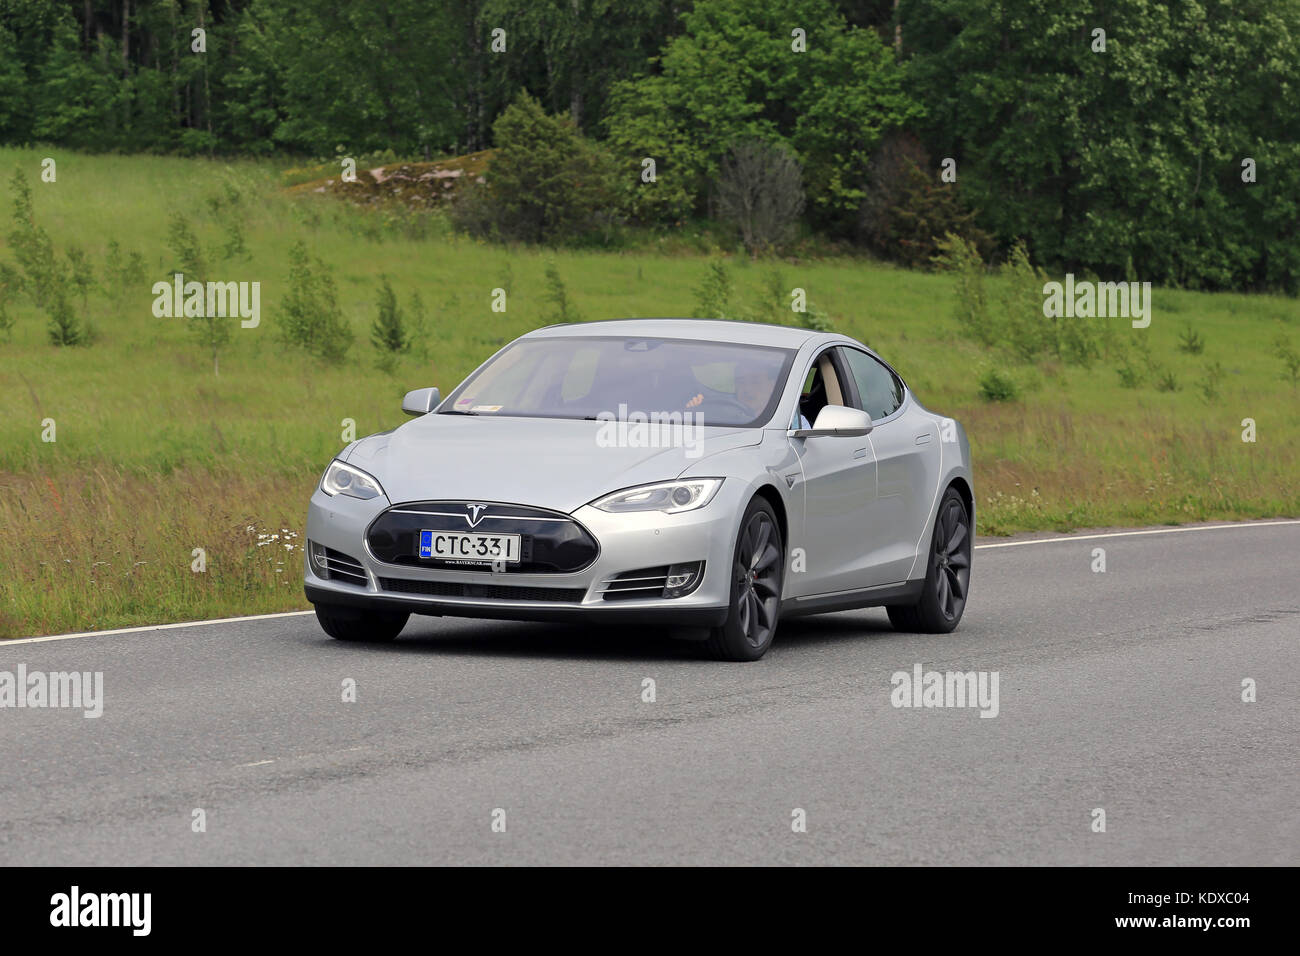 PAIMIO, FINLAND - JUNE 23, 2016: Grey Tesla Model S electric car moves along asphalt road in South of Finland at summer. Stock Photo